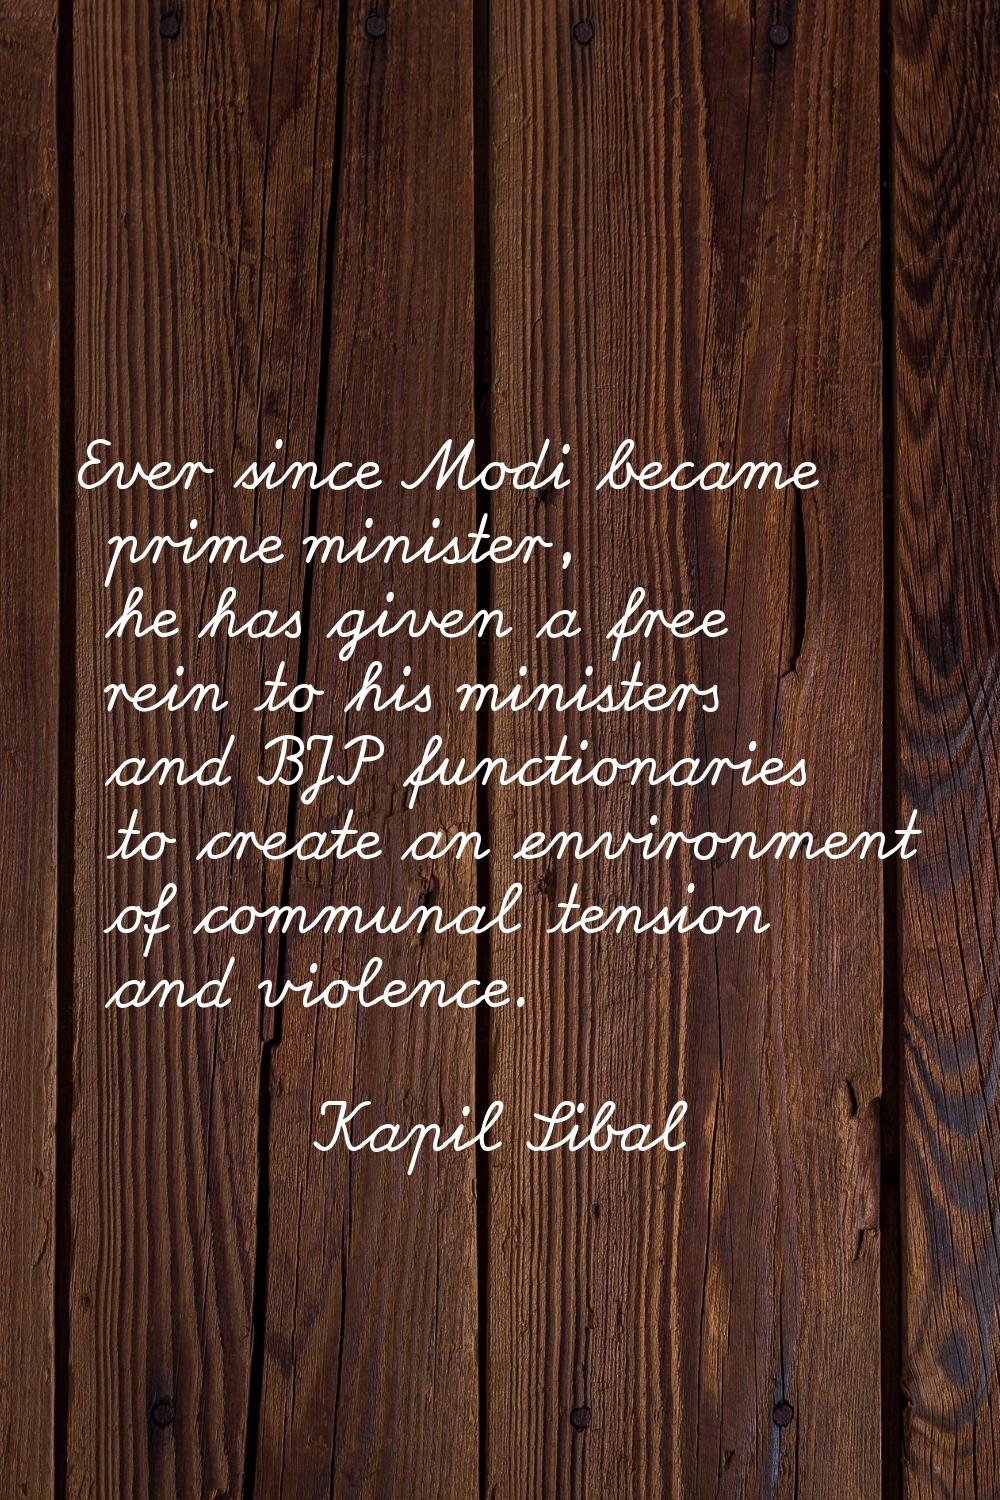 Ever since Modi became prime minister, he has given a free rein to his ministers and BJP functionar